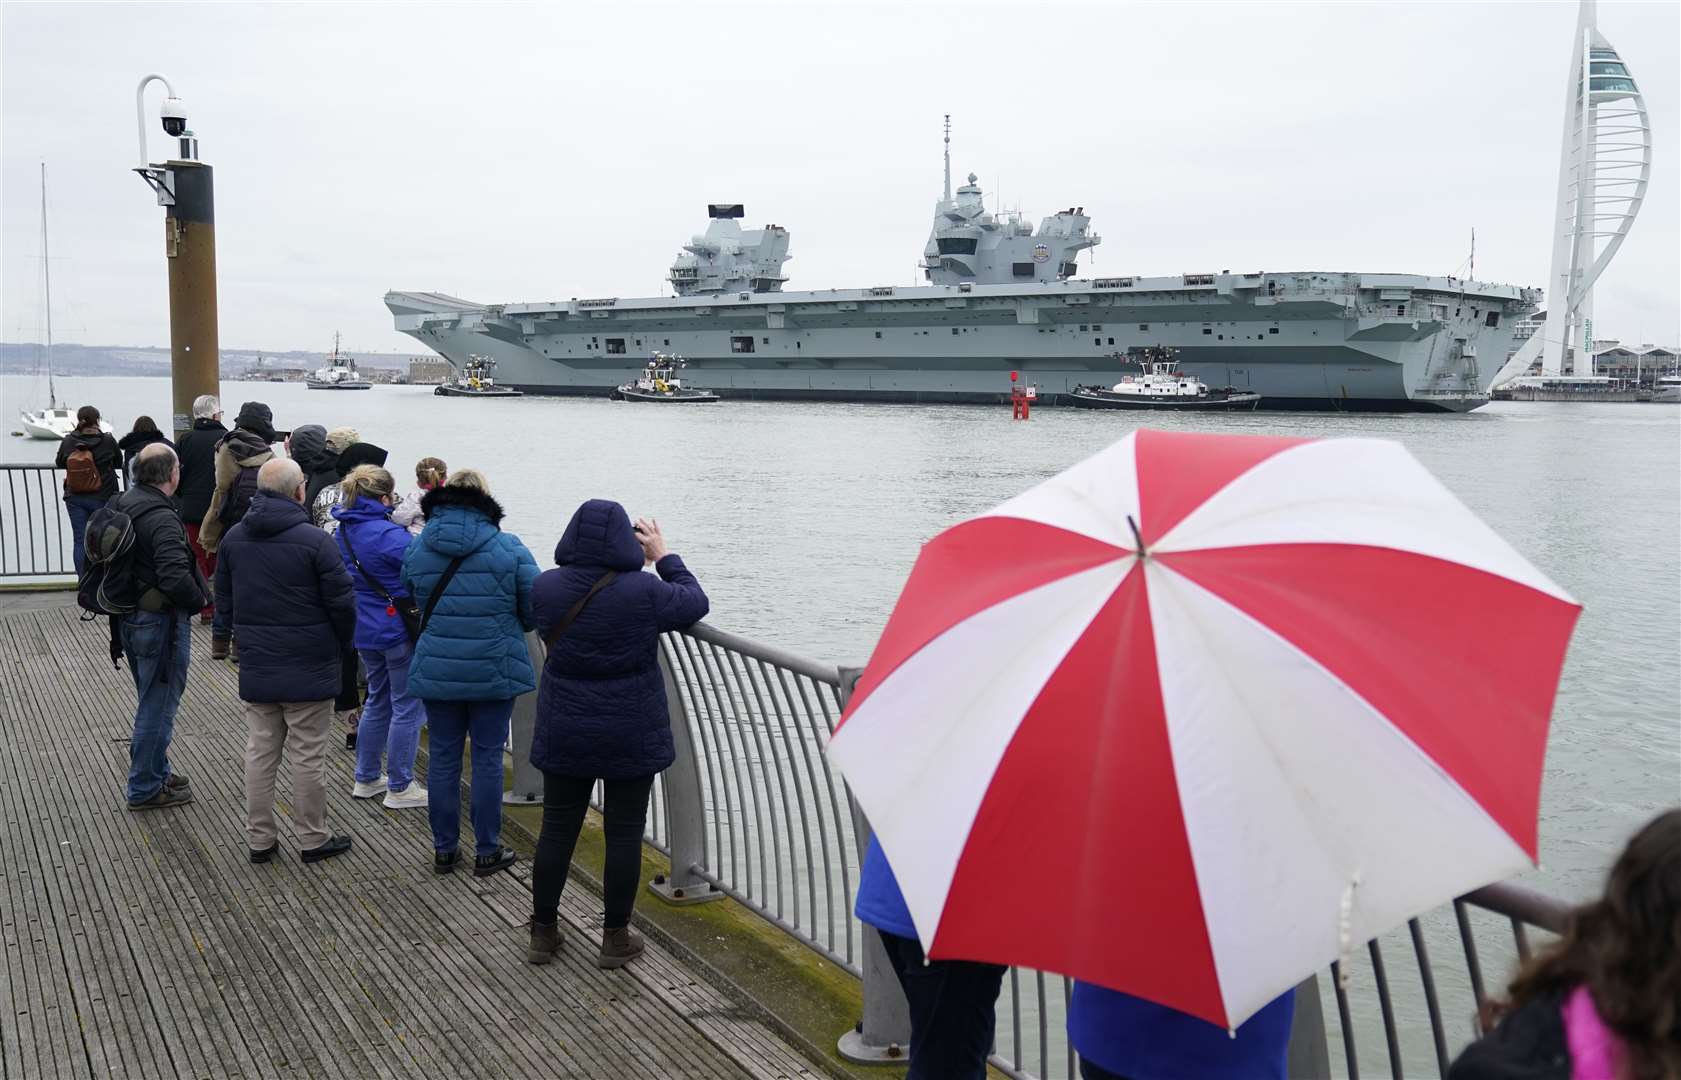 The HMS Prince of Wales arrived back in Portsmouth after Exercise Steadfast Defender (Andrew Matthews/PA)